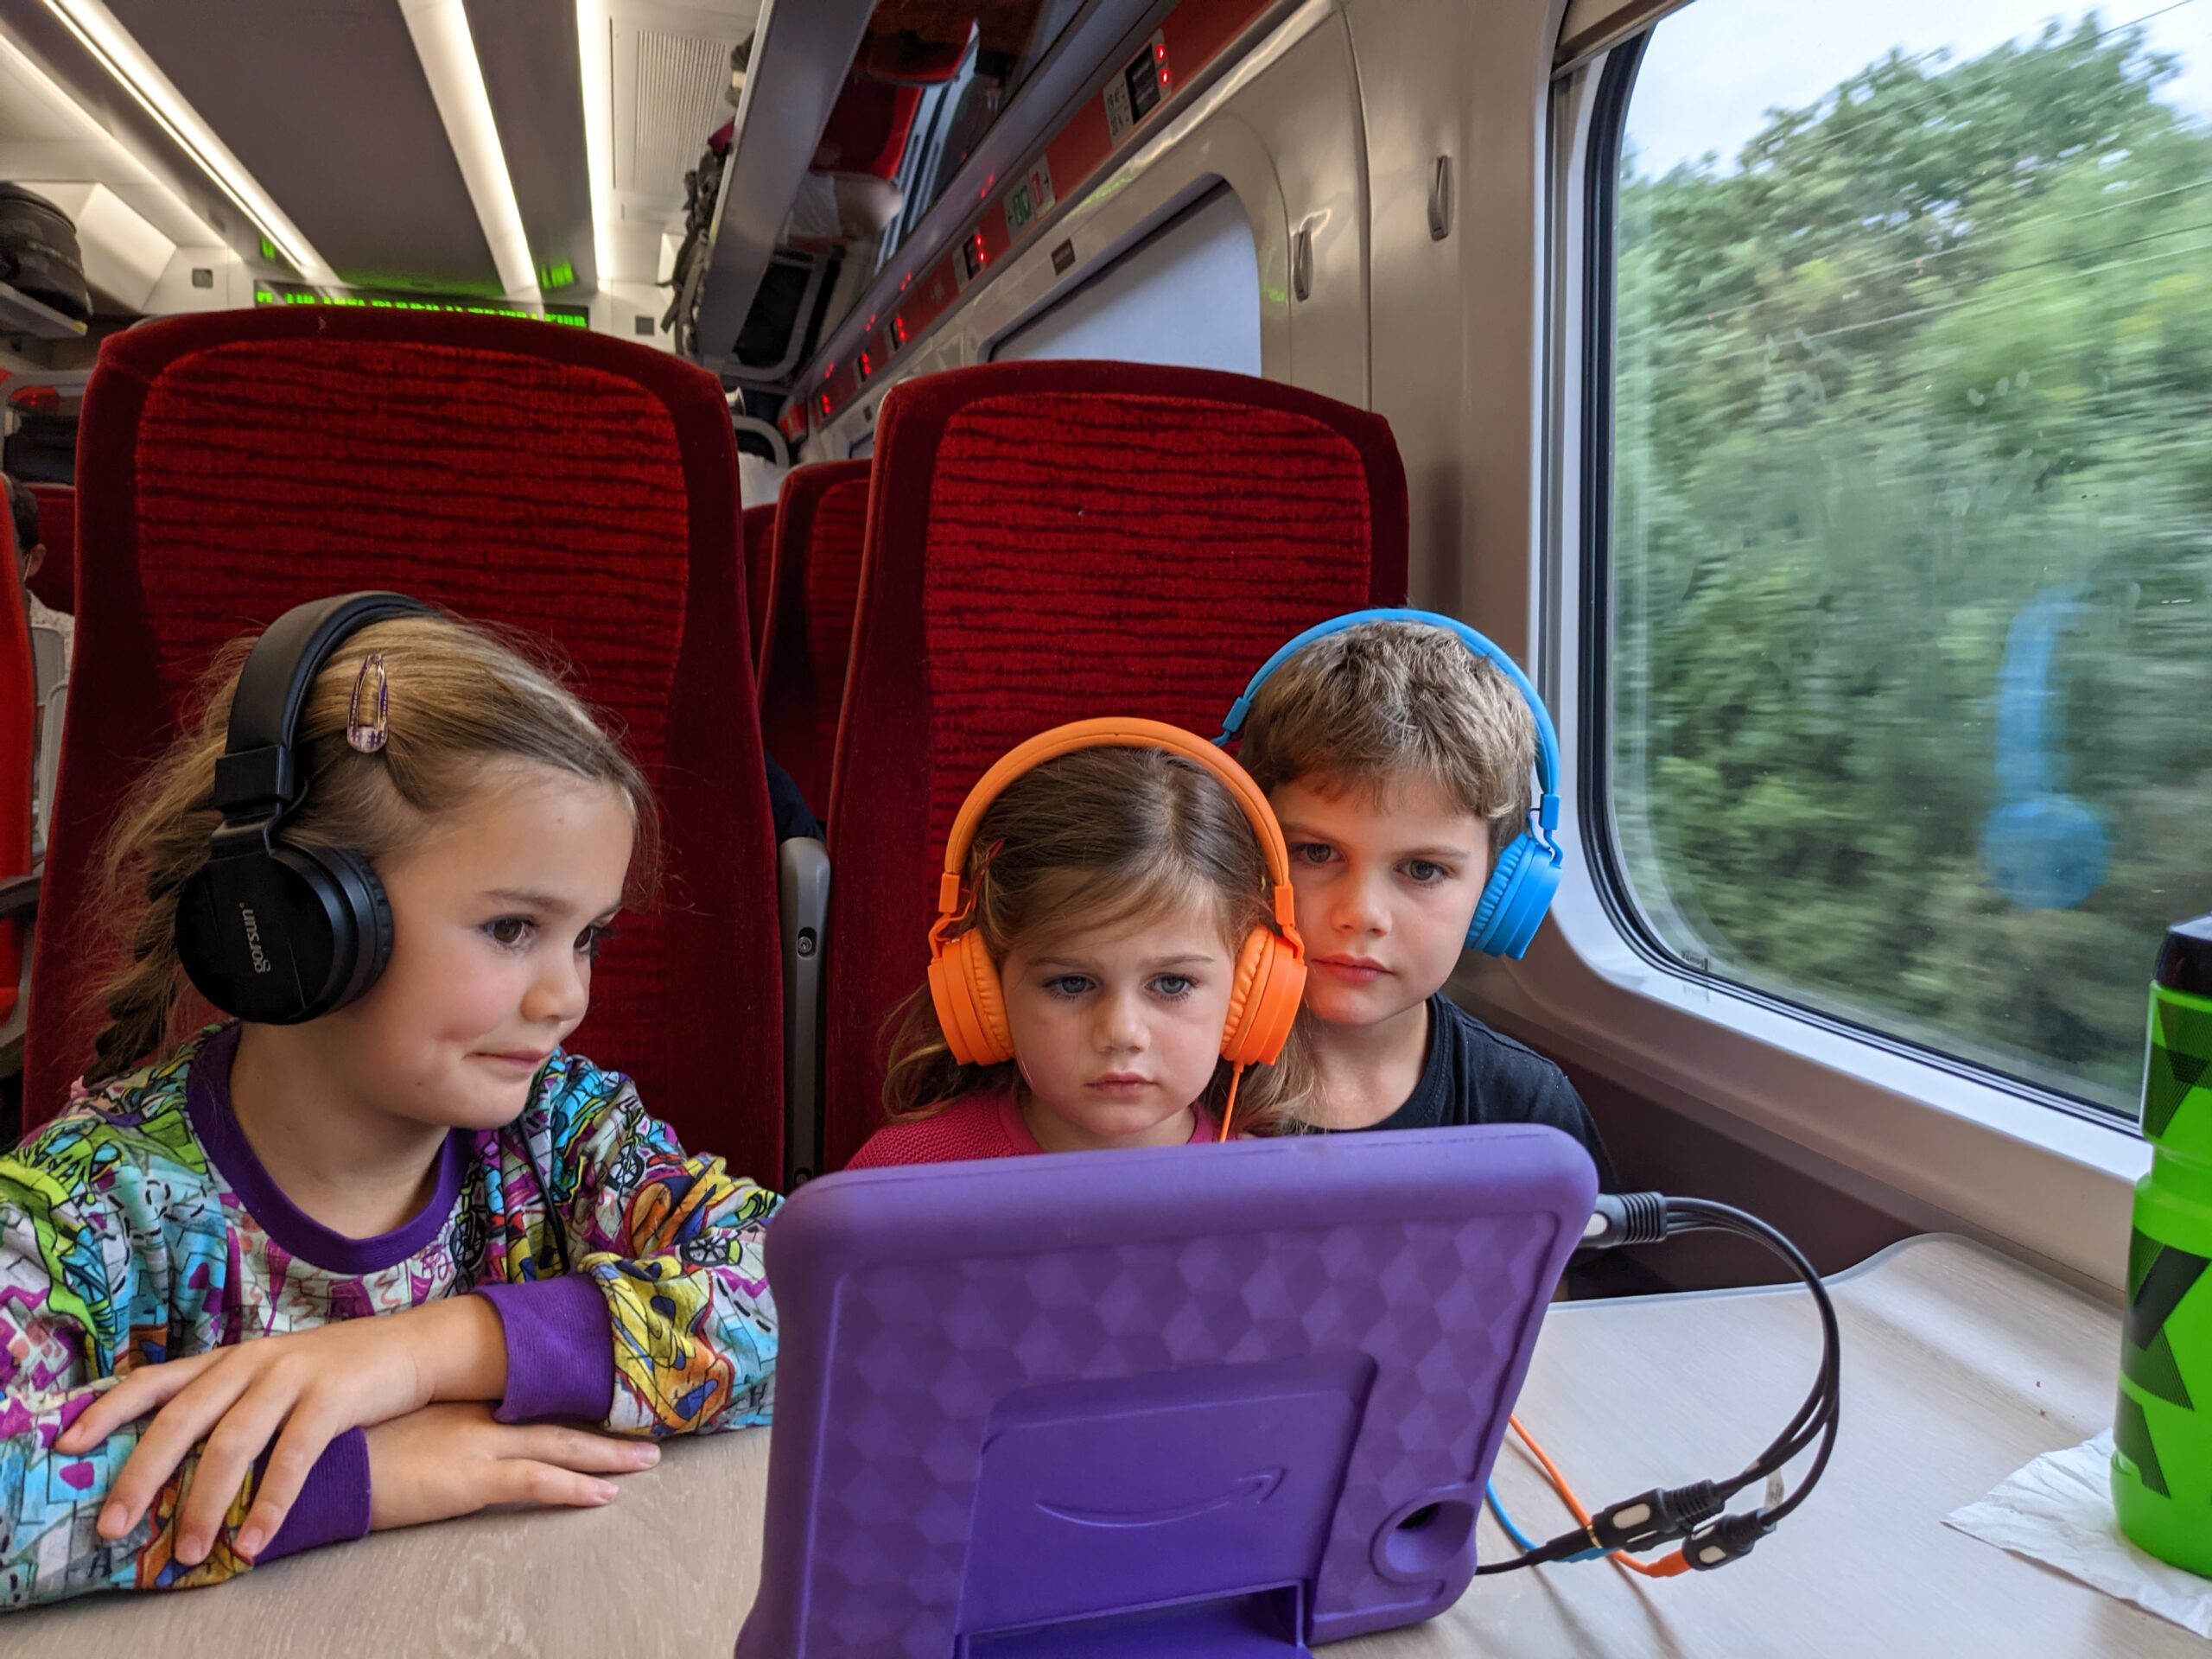 three children on train seat wearing headphones watching a tablet